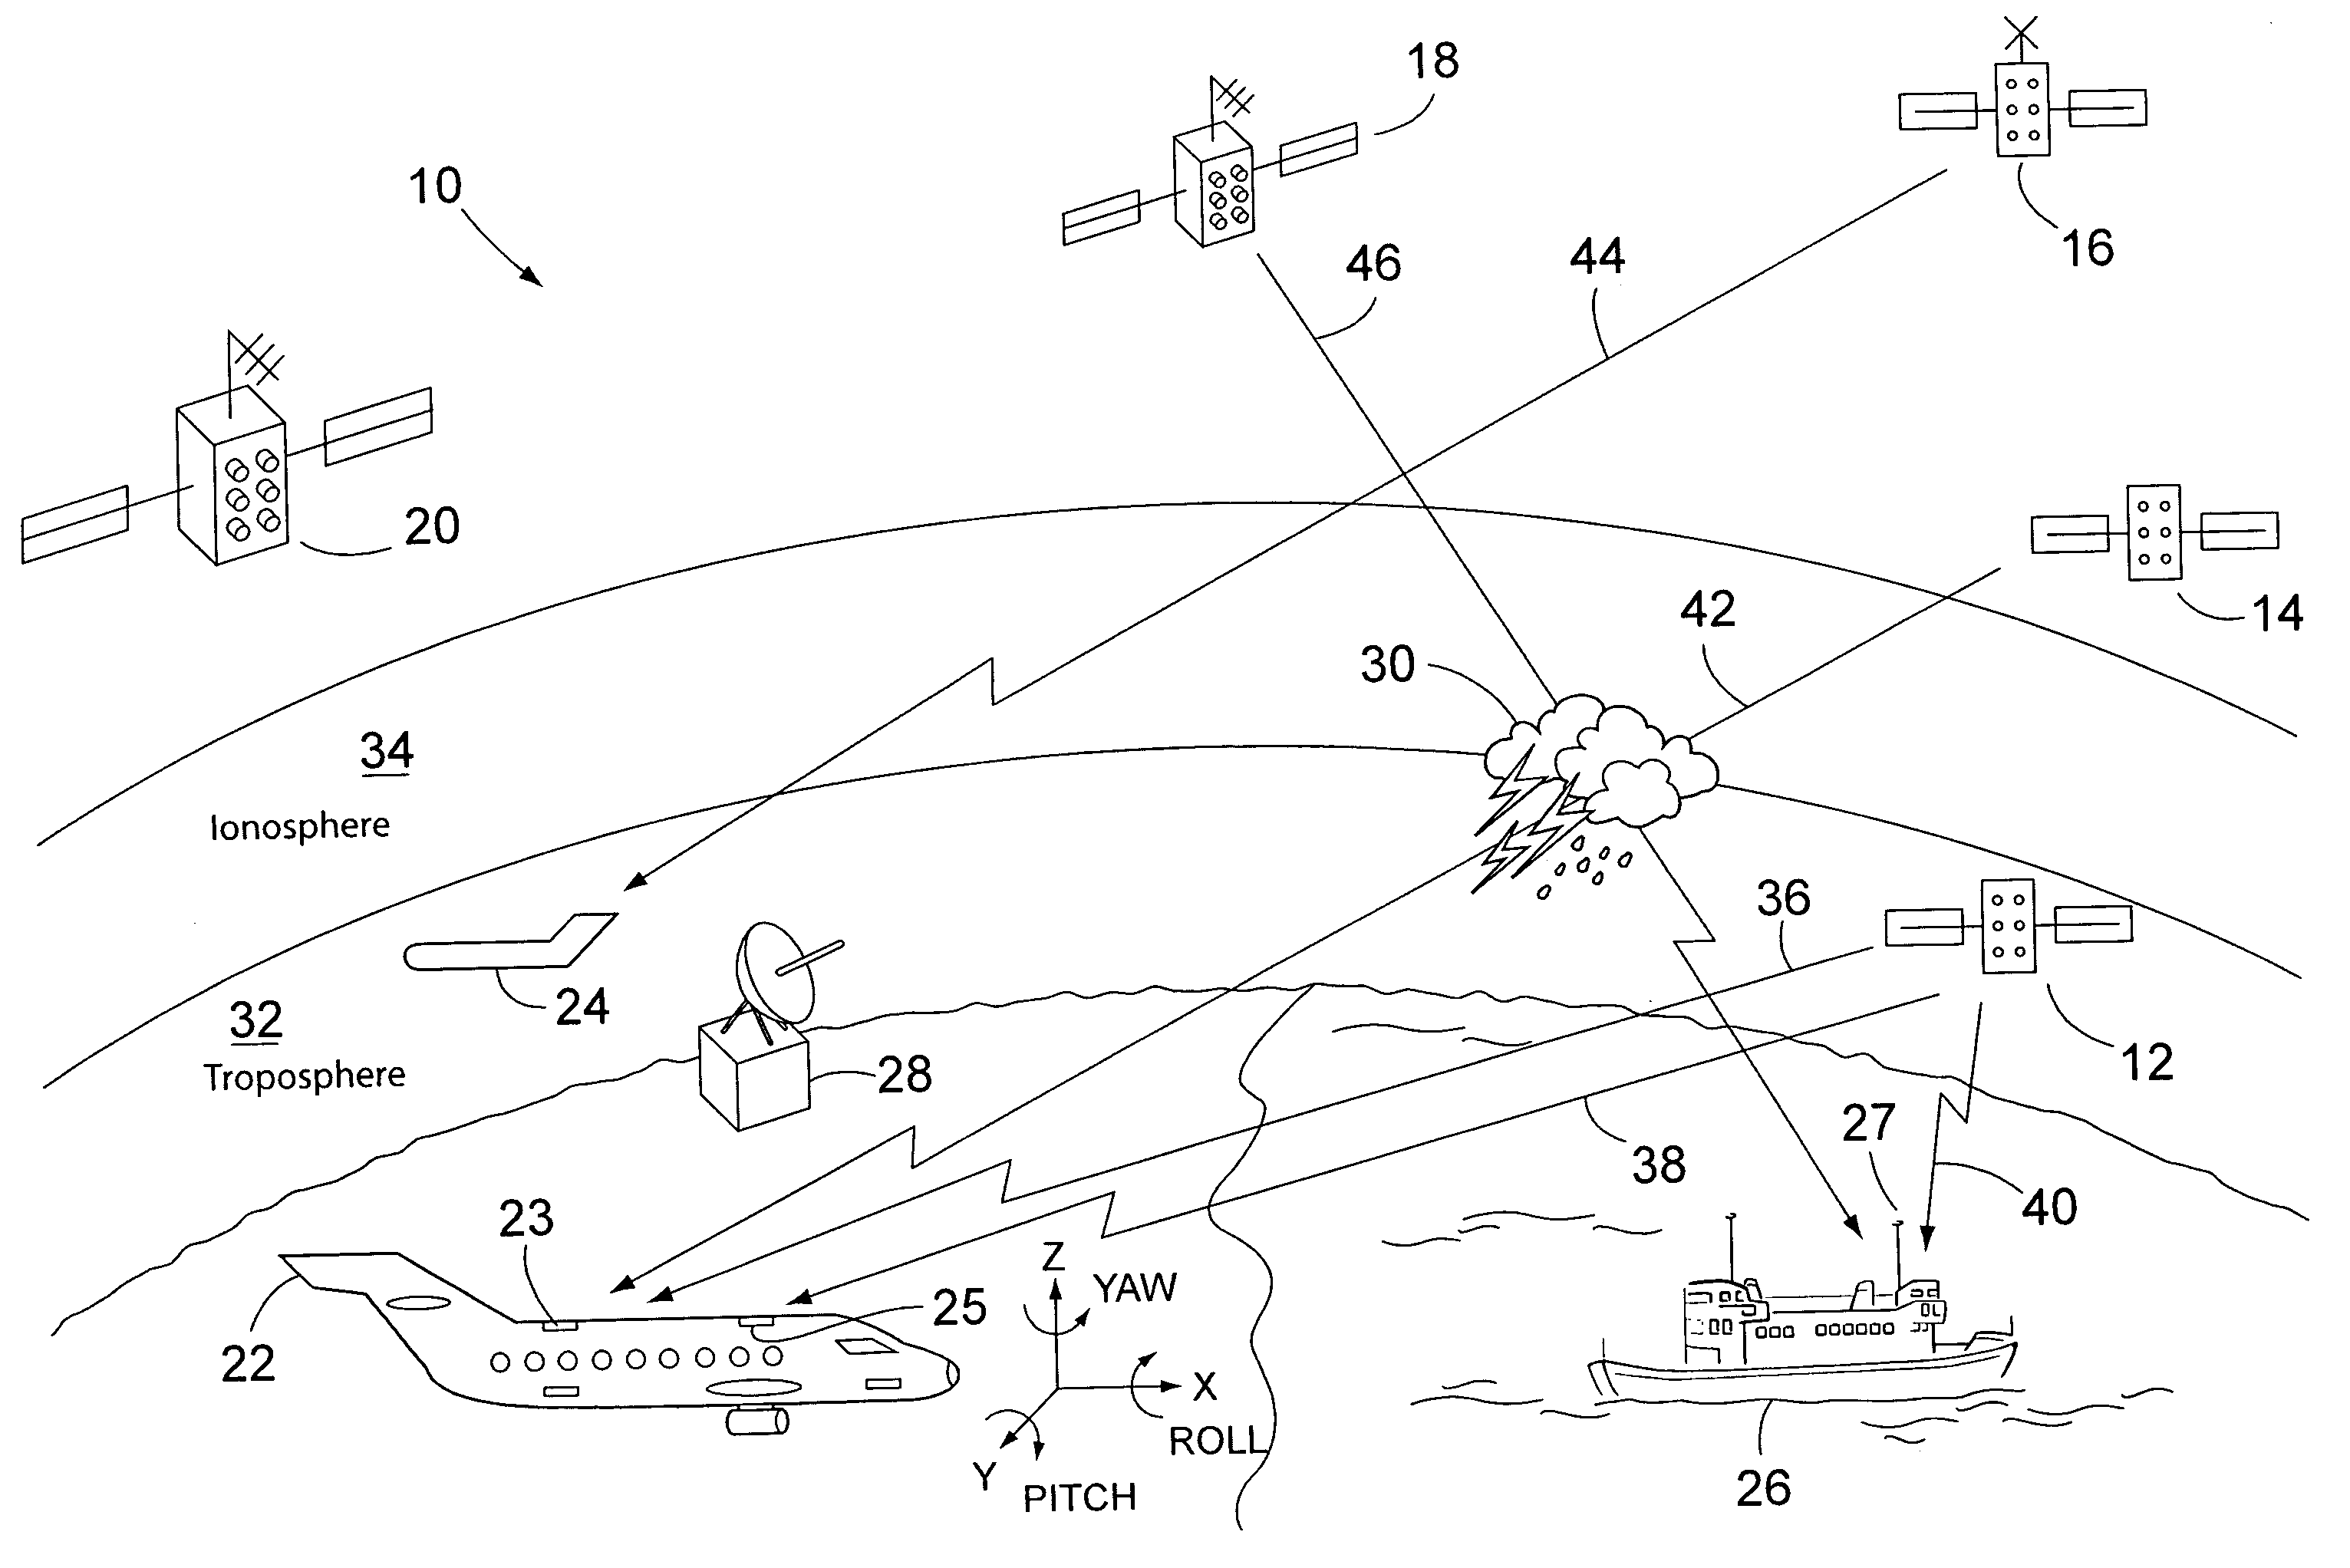 System for measuring turbulence remotely